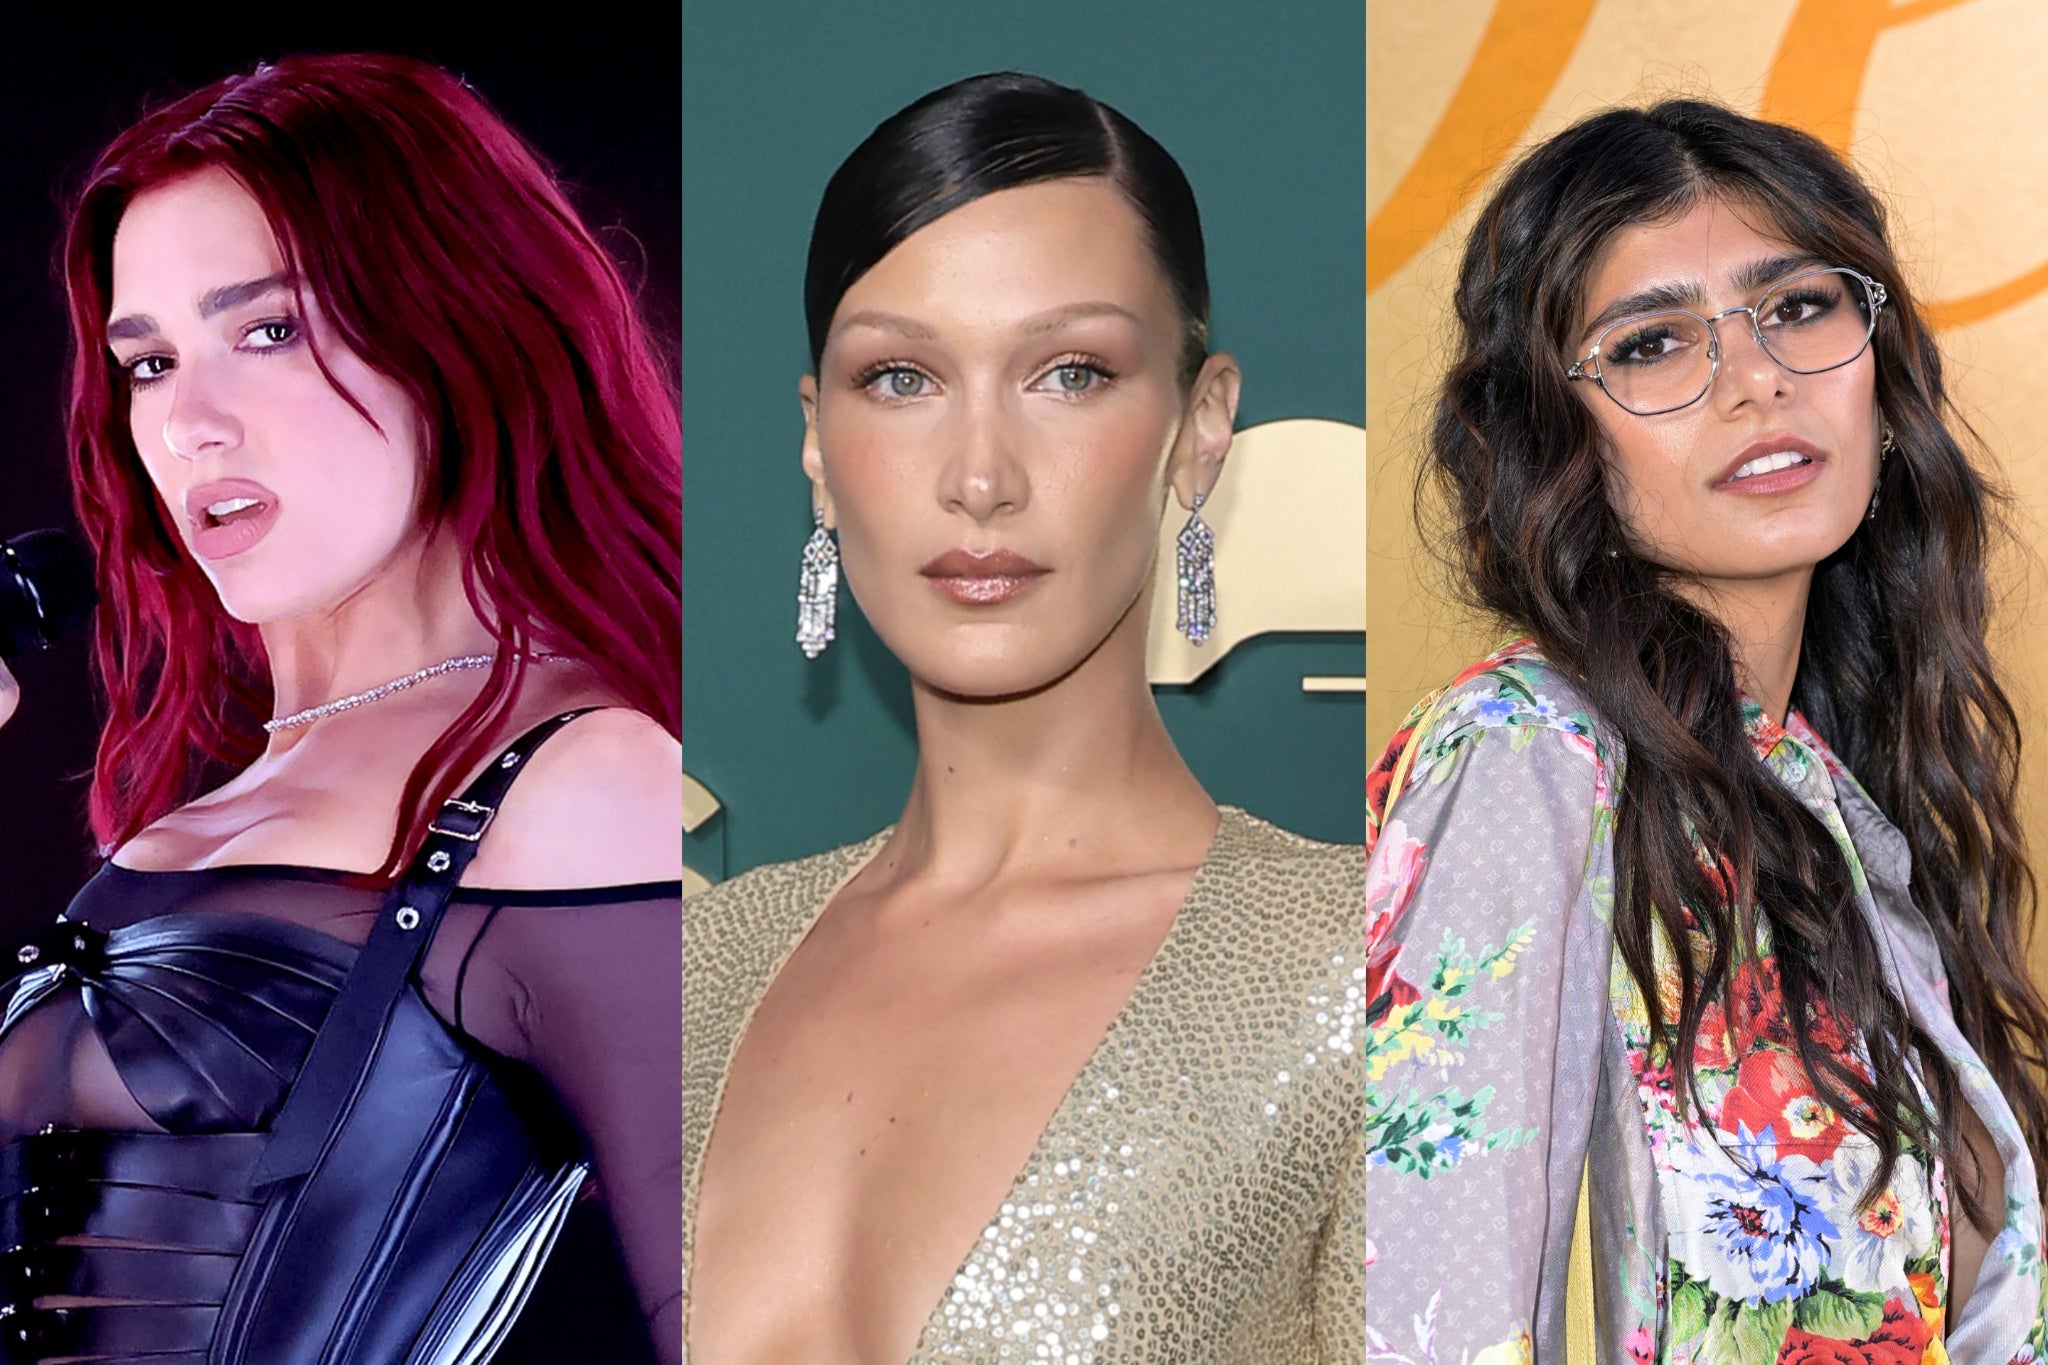 Dua Lipa, Bella Hadid and Mia Khalifa are all called to be killed by the IDF in the song